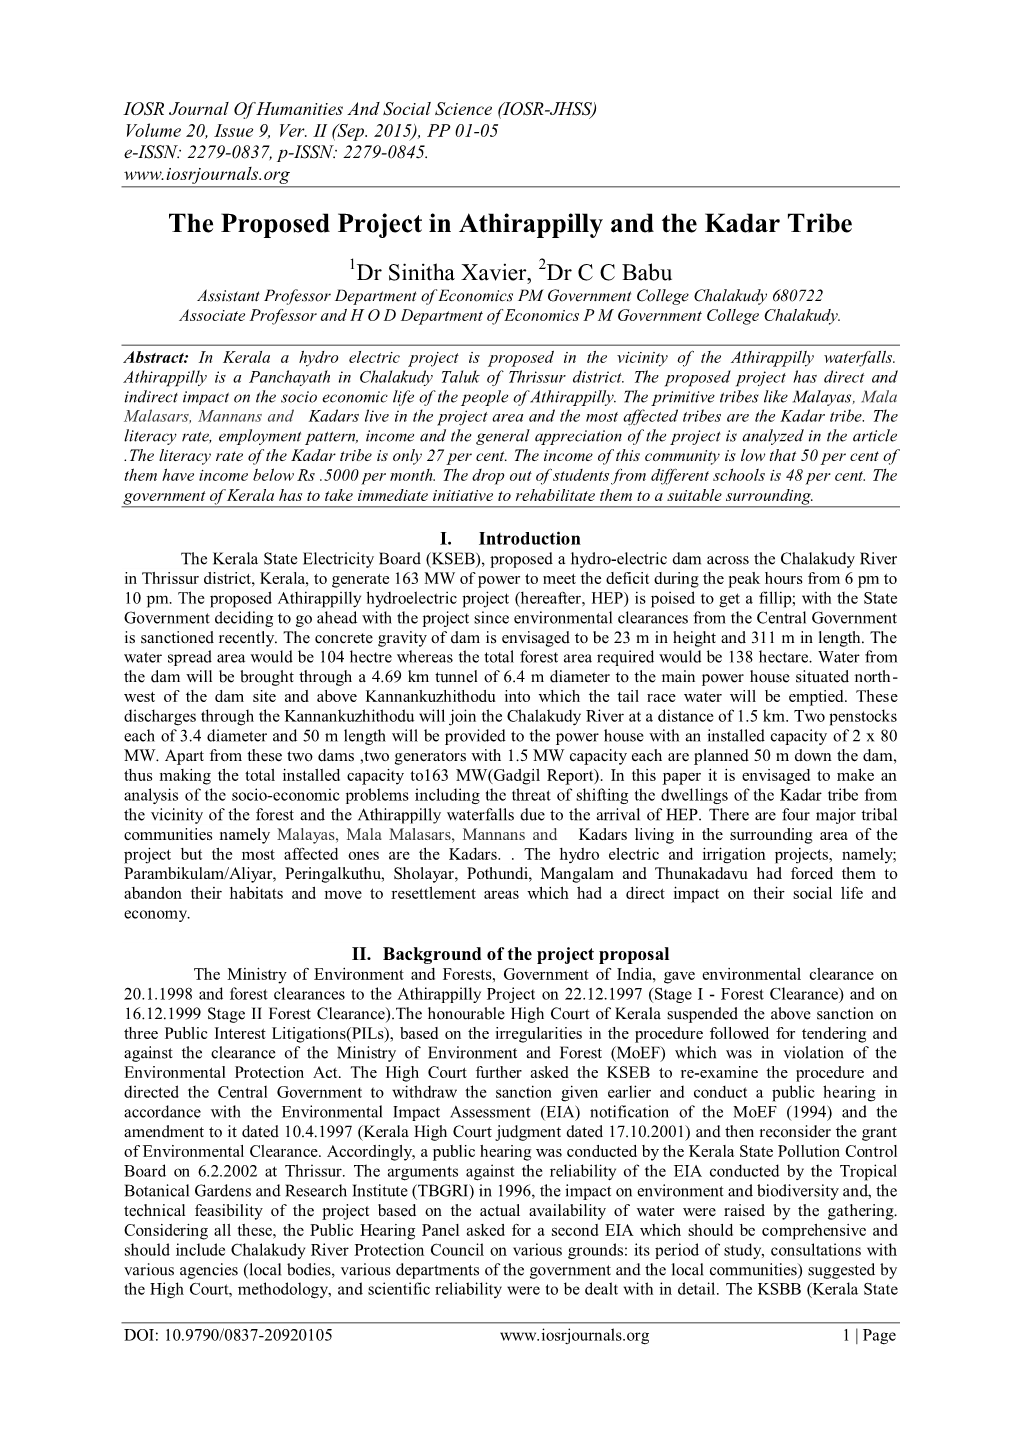 The Proposed Project in Athirappilly and the Kadar Tribe